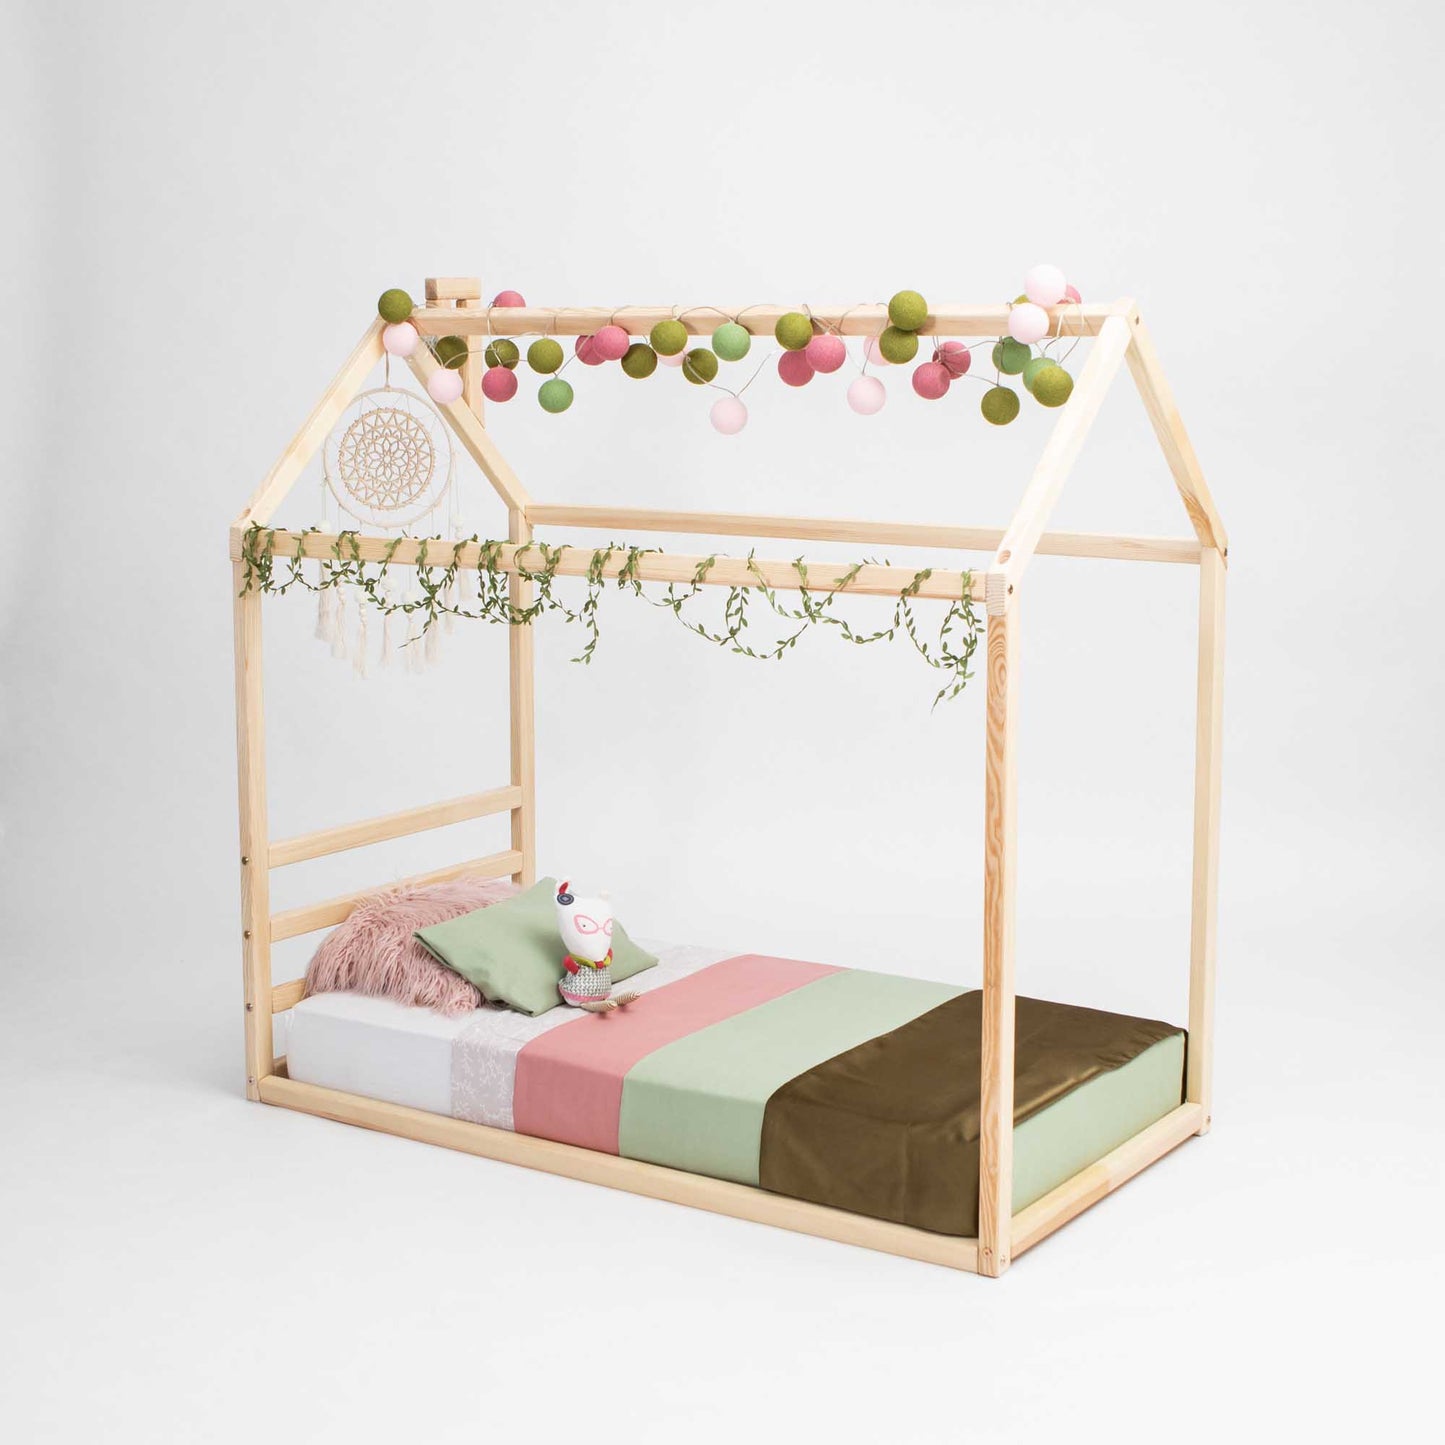 A Children's house bed with a horizontal headboard and cozy sleep haven featuring pom poms from Sweet Home From Wood.